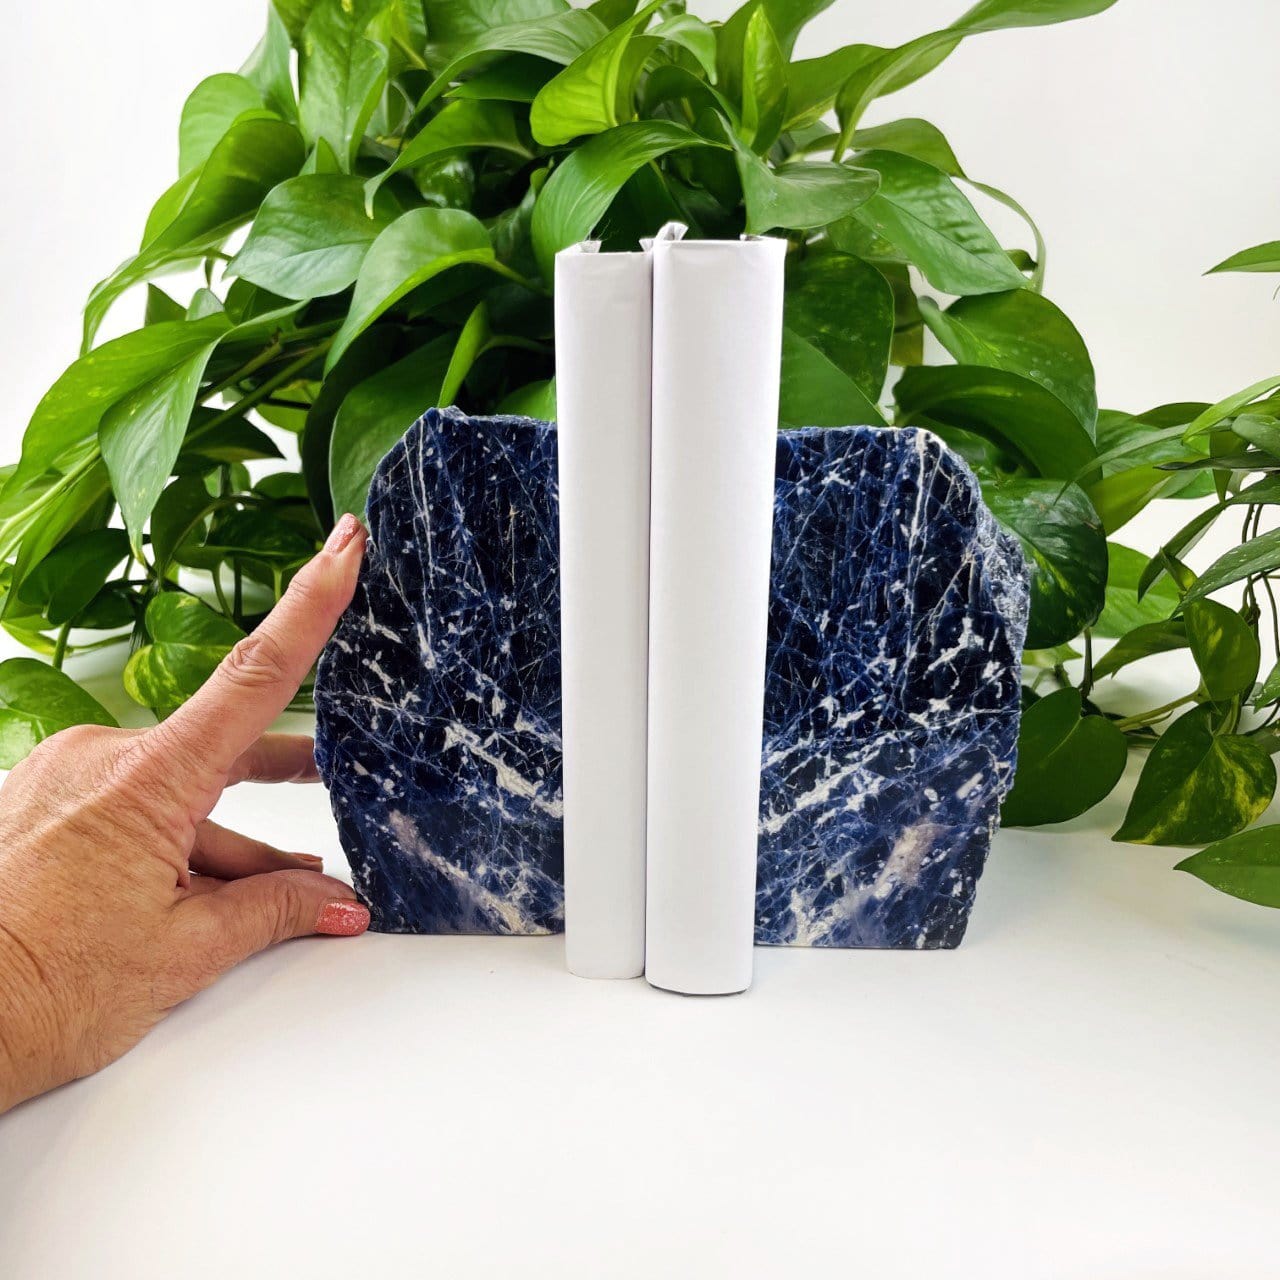 Sodalite bookend displayed with hand next to it for size reference 